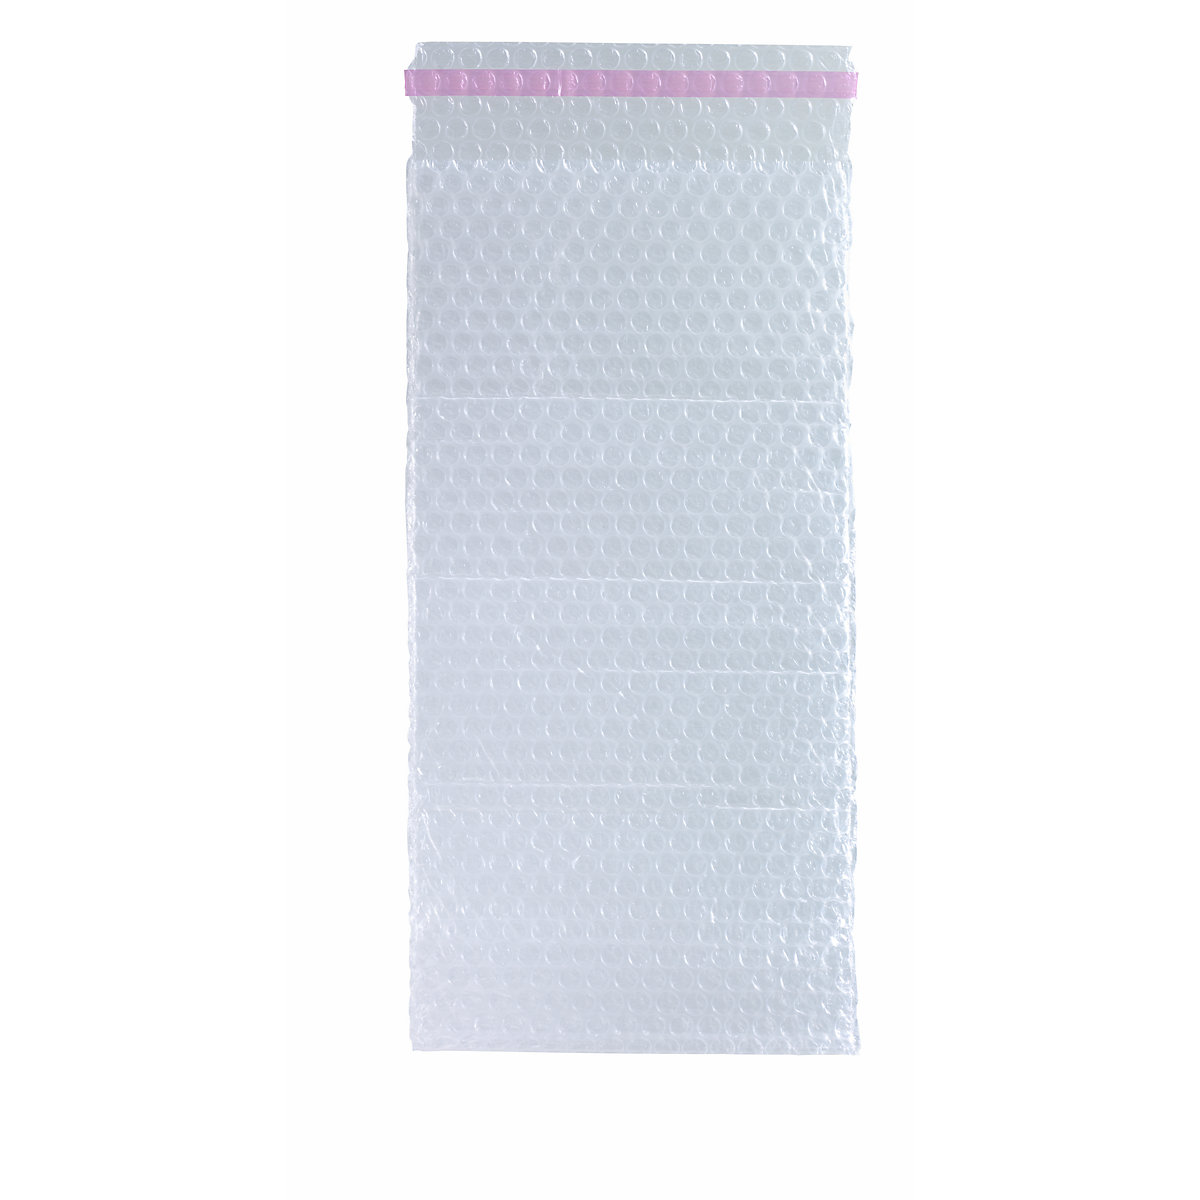 Bubblewrap bags large 36×31″ padded pouches